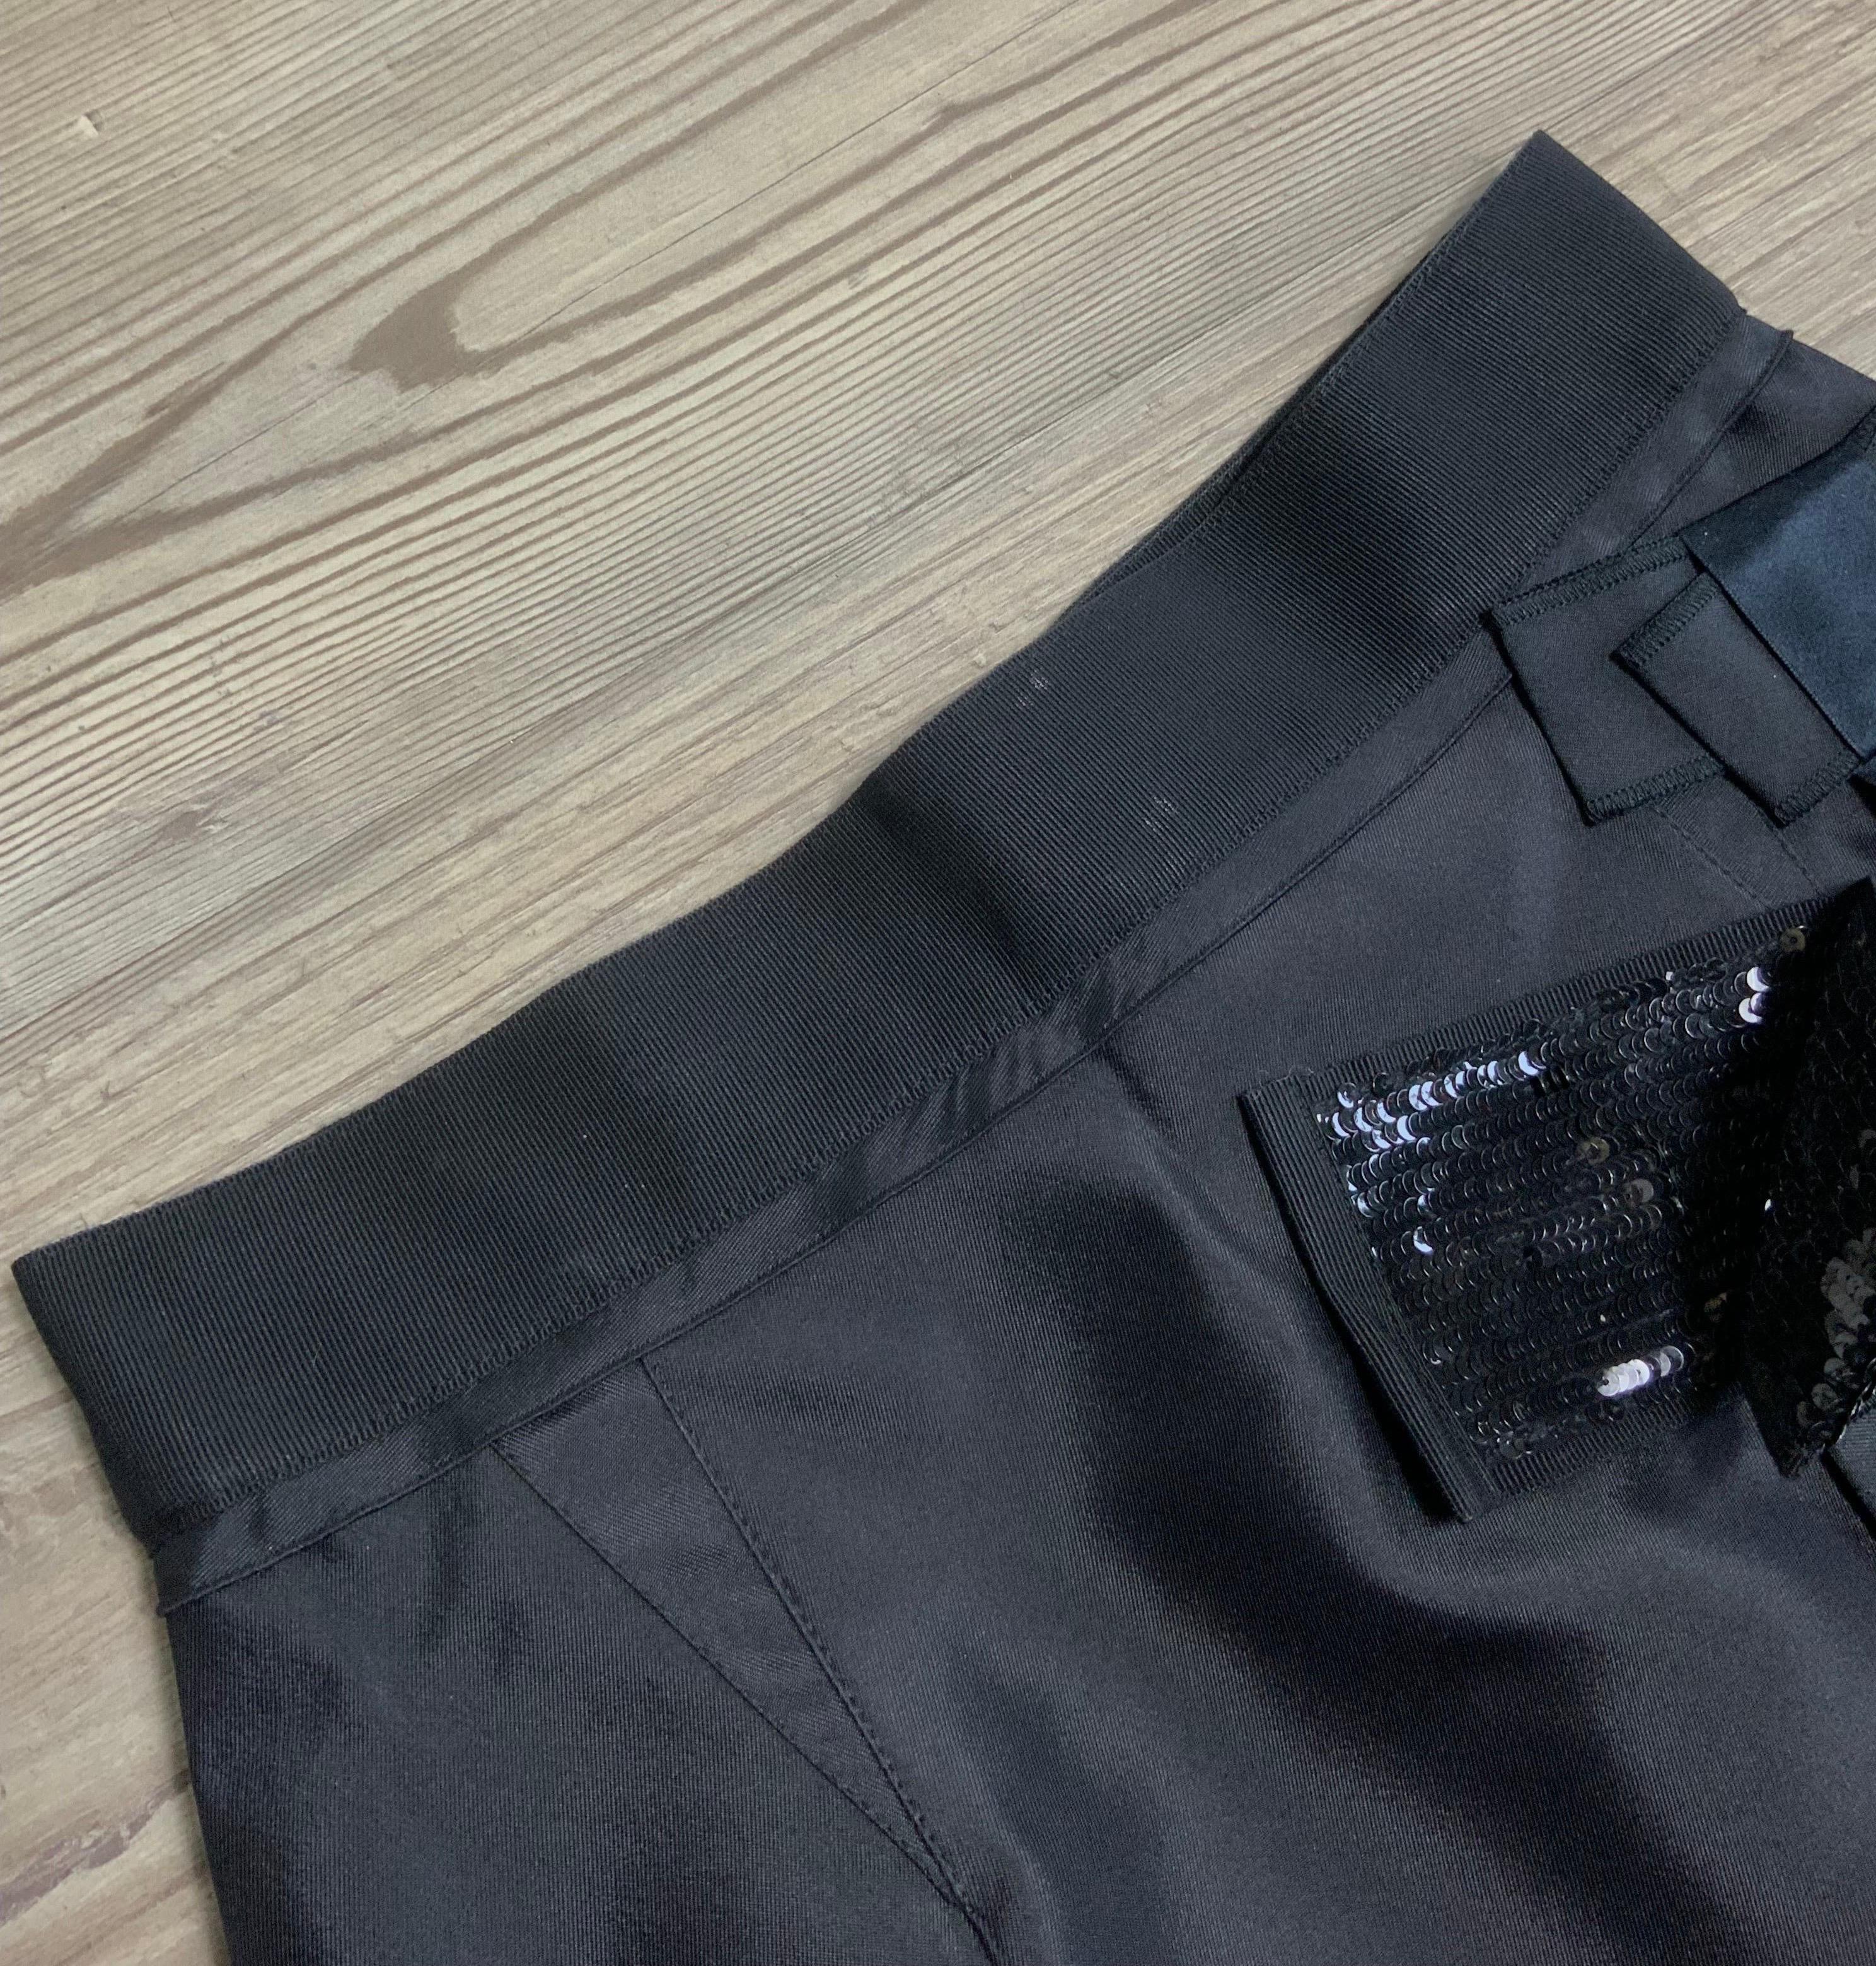 Dolce and Gabbana Black Skirt + jacket Suit For Sale 7